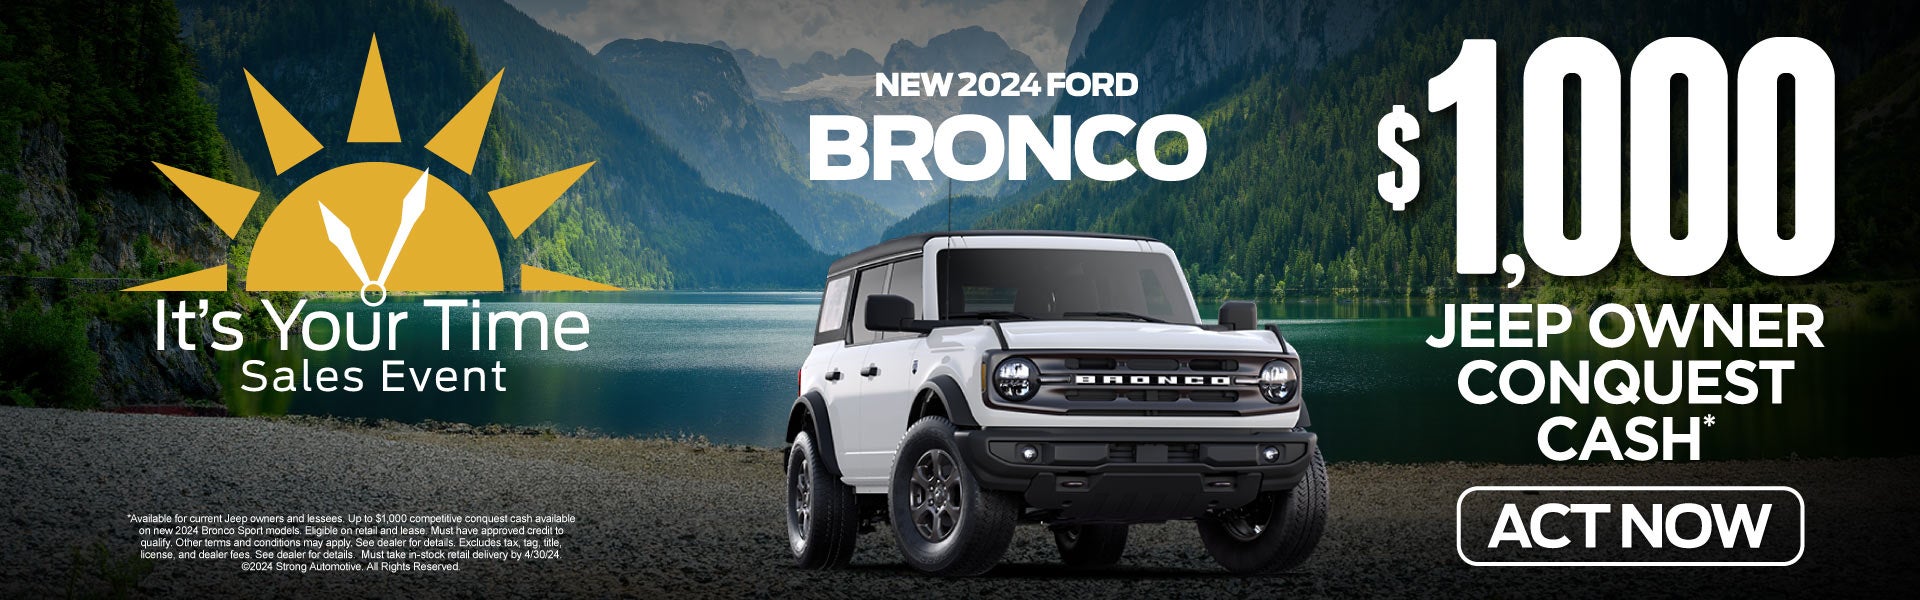 2024 Ford bronco $1,000 conquest cash - act now